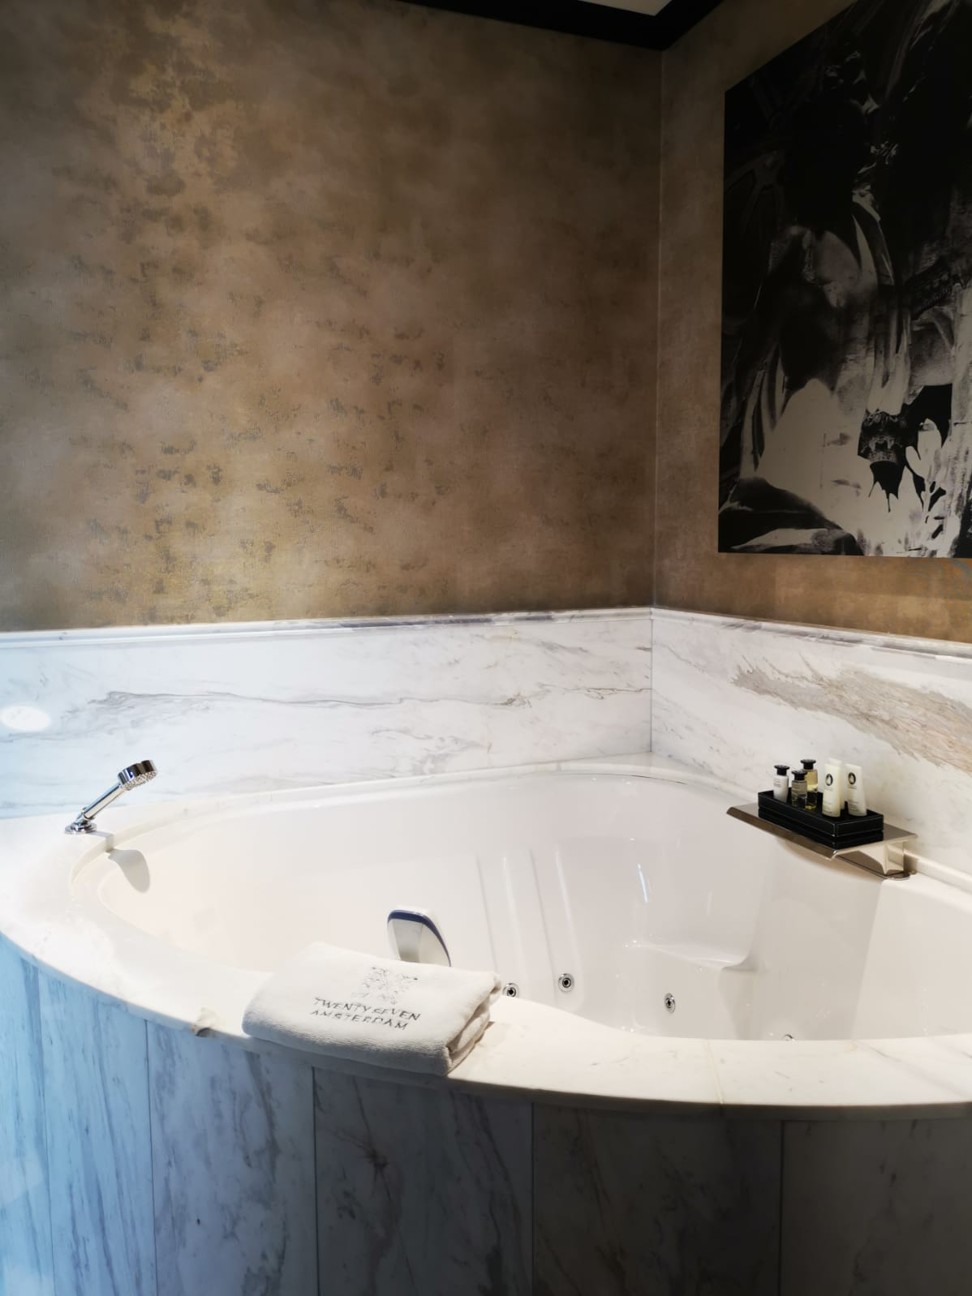 The large whirlpool tub, which is big enough to accommodate two people. Photo: Winnie Chung